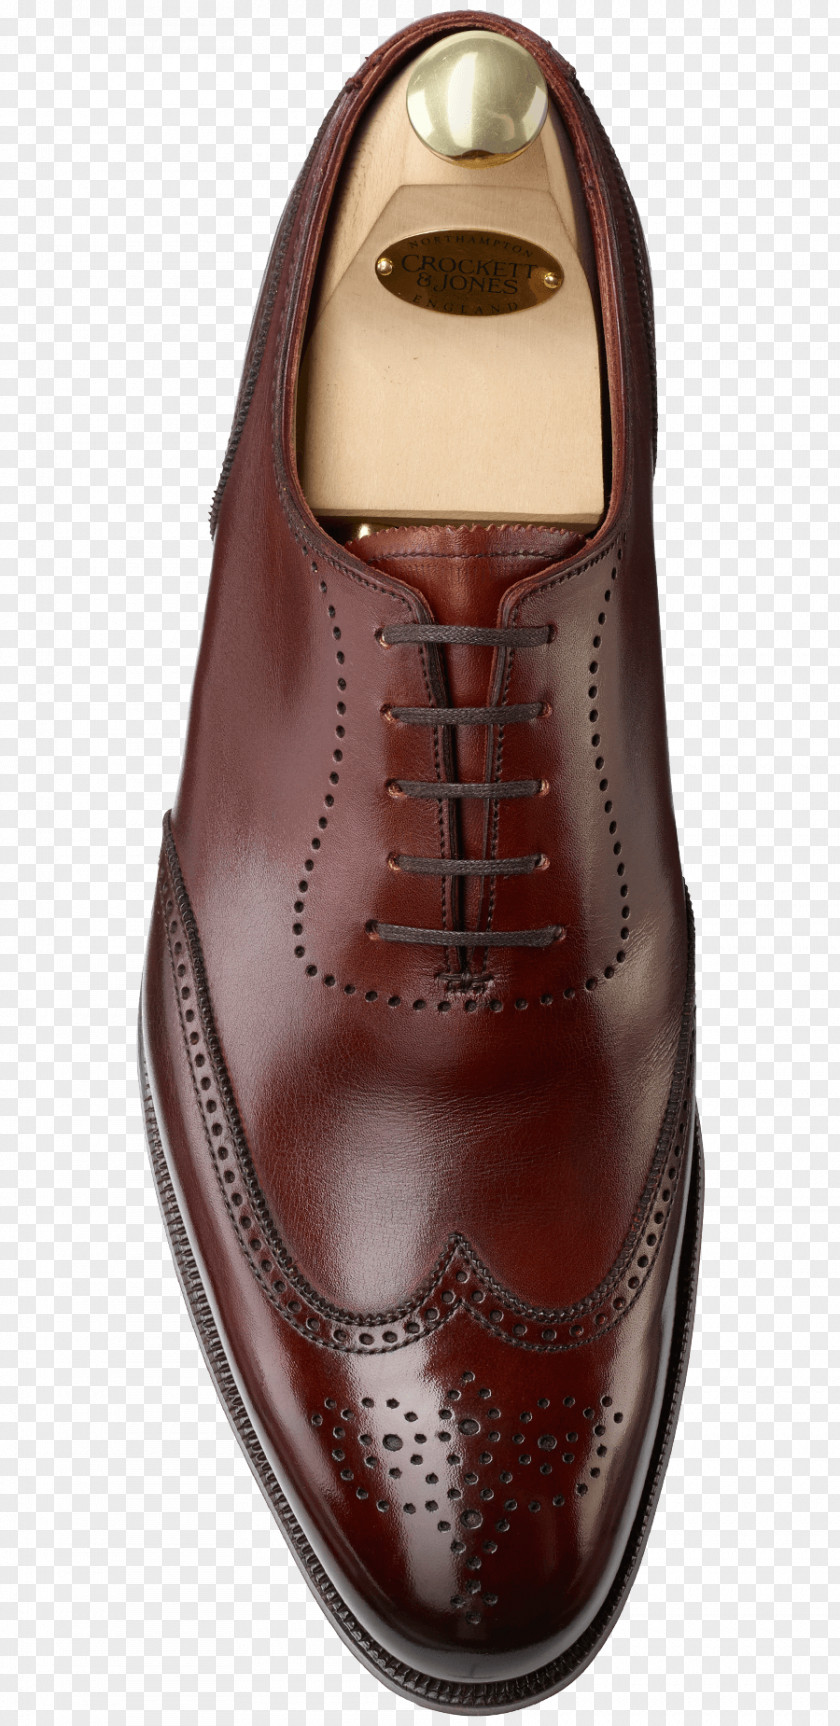 Goodyear Welt Oxford Shoe Leather Boot Slip-on PNG